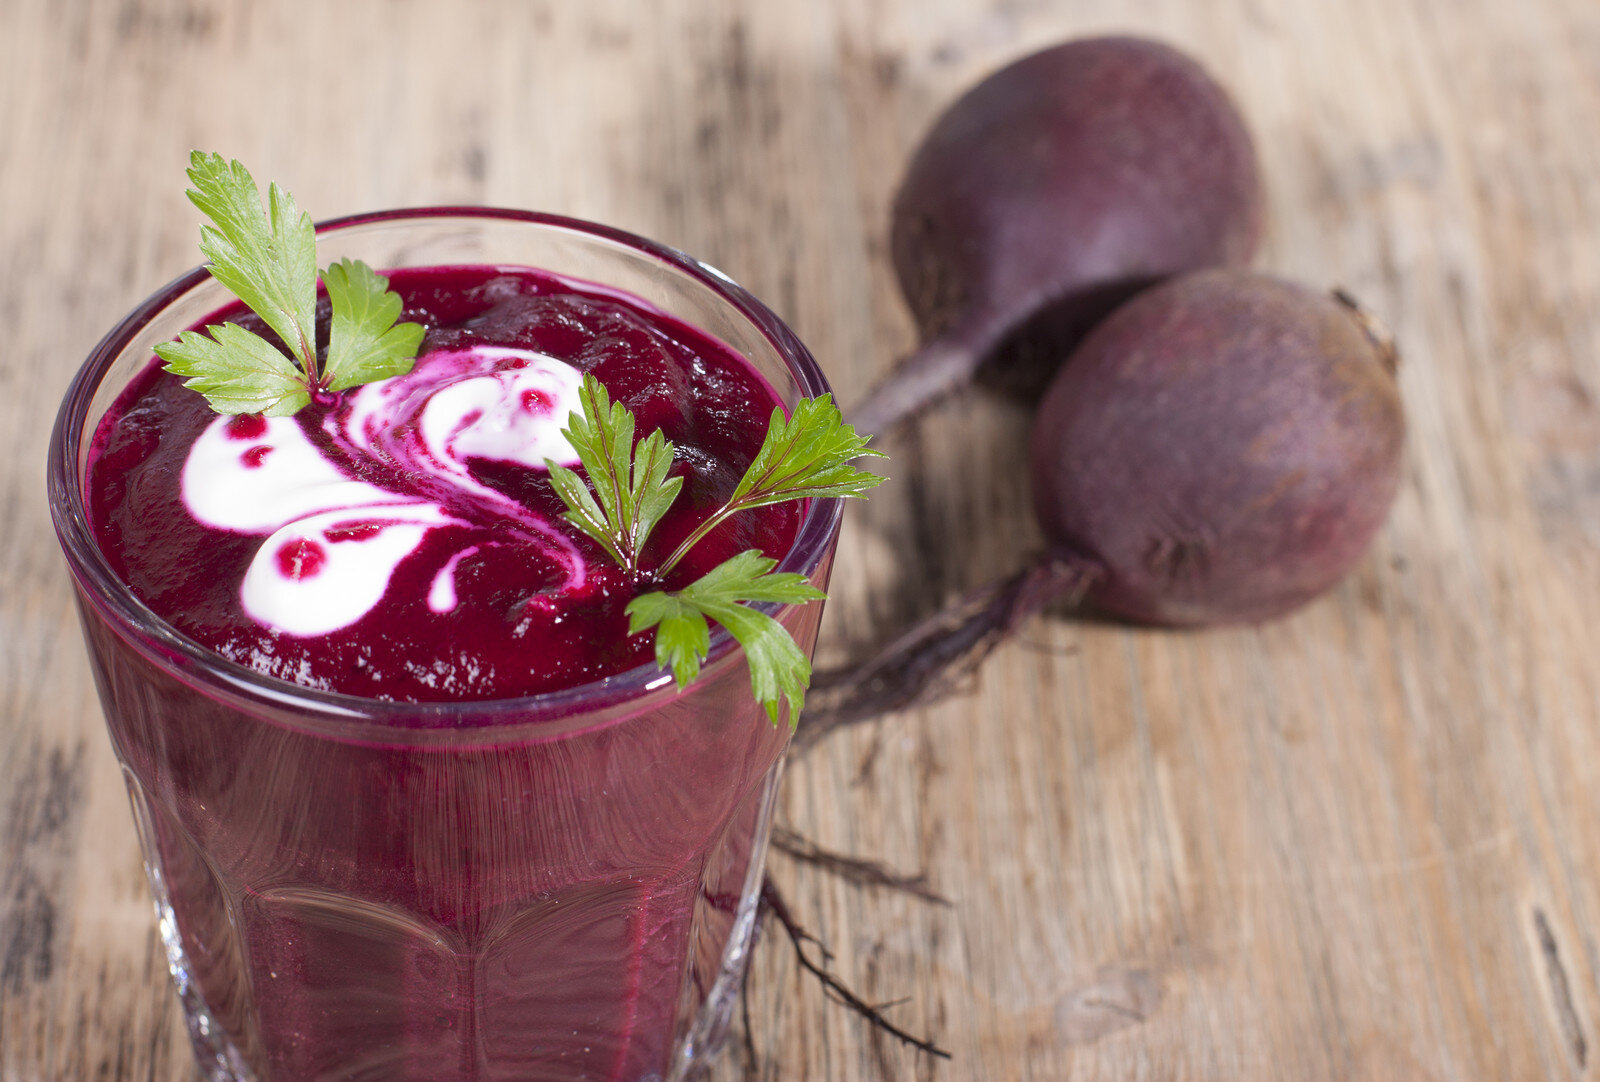 Beet and Berry Smoothie used 2020.09.11 - canstockphoto26244277.jpg